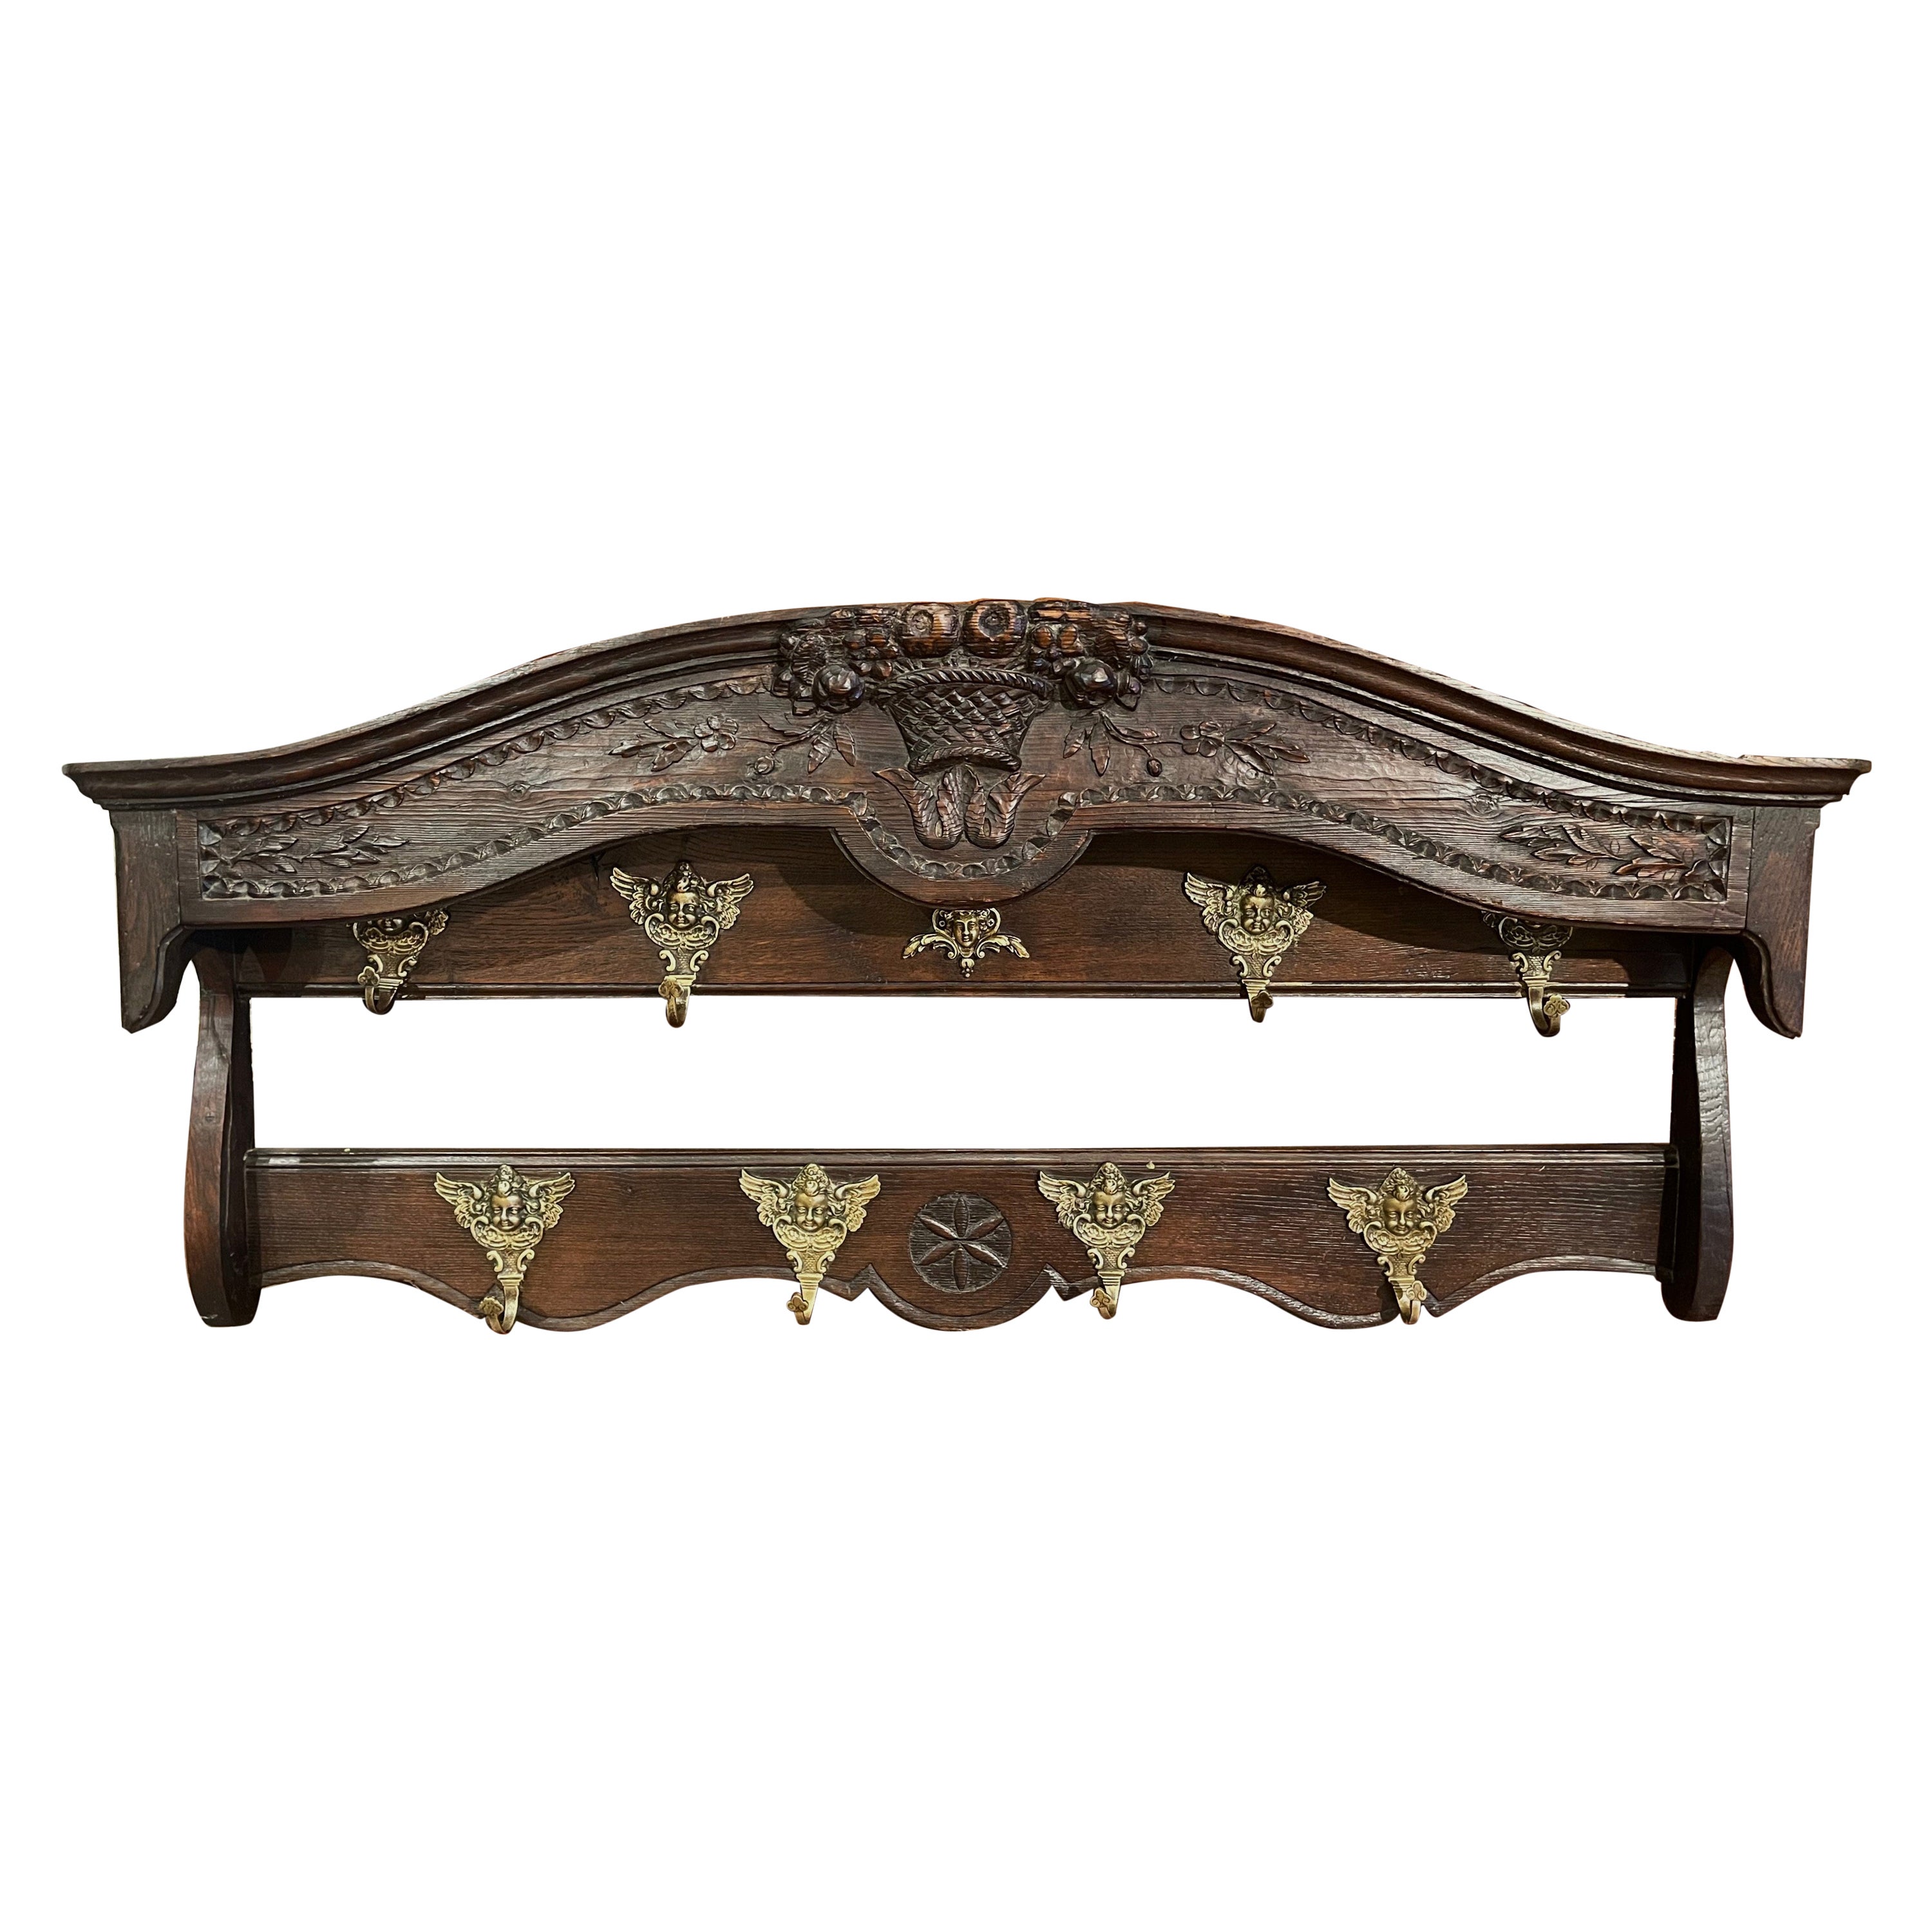 Mid-19th Century French Carved Oak Hanging Shelf with Hooks from Normandy